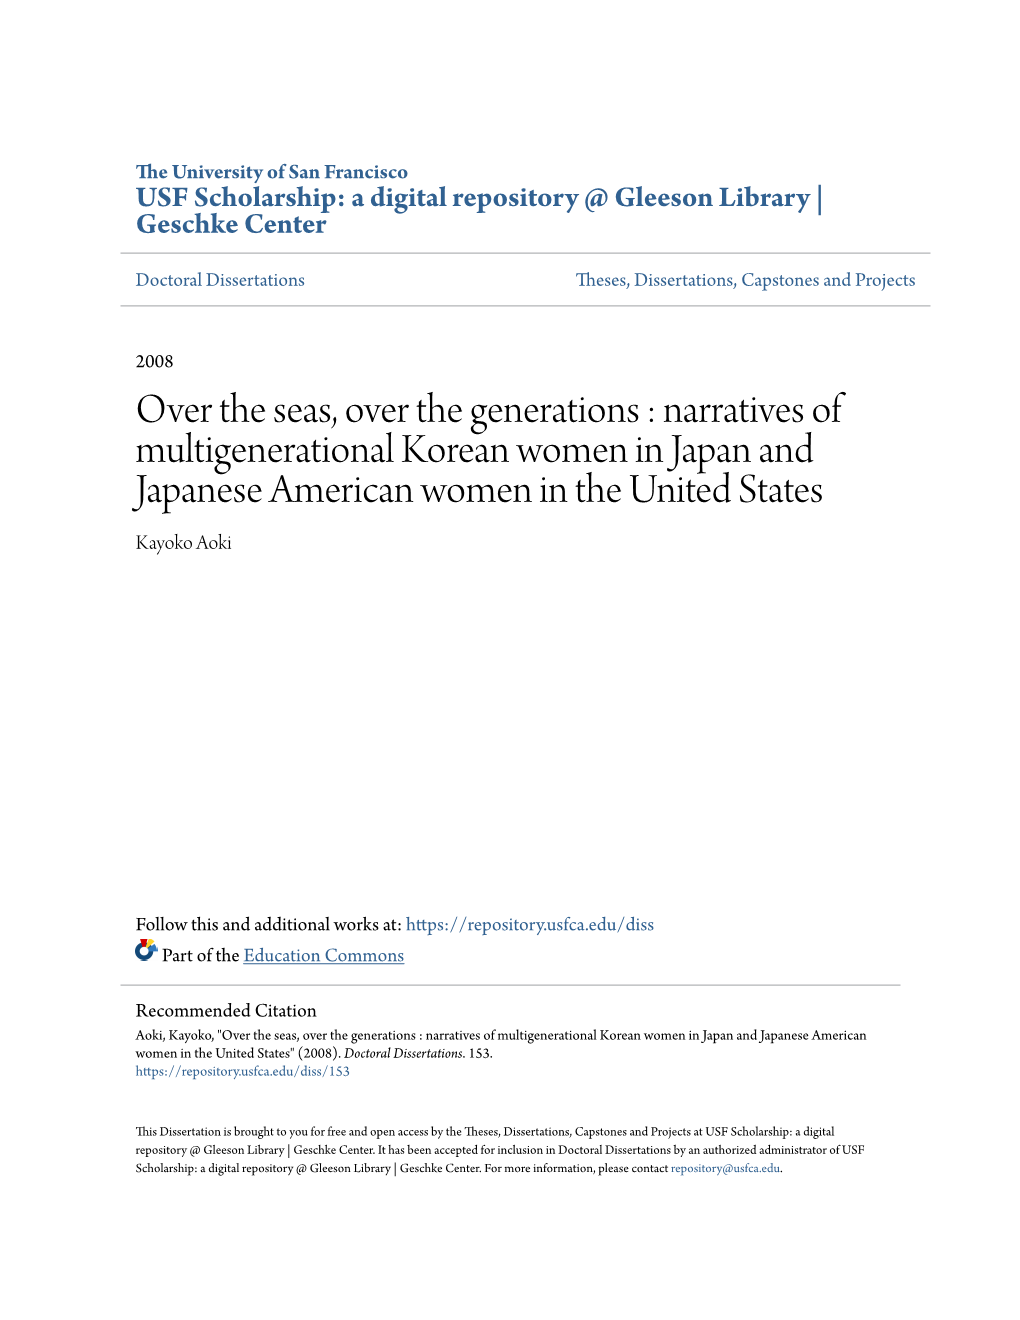 Over the Seas, Over the Generations : Narratives of Multigenerational Korean Women in Japan and Japanese American Women in the United States Kayoko Aoki